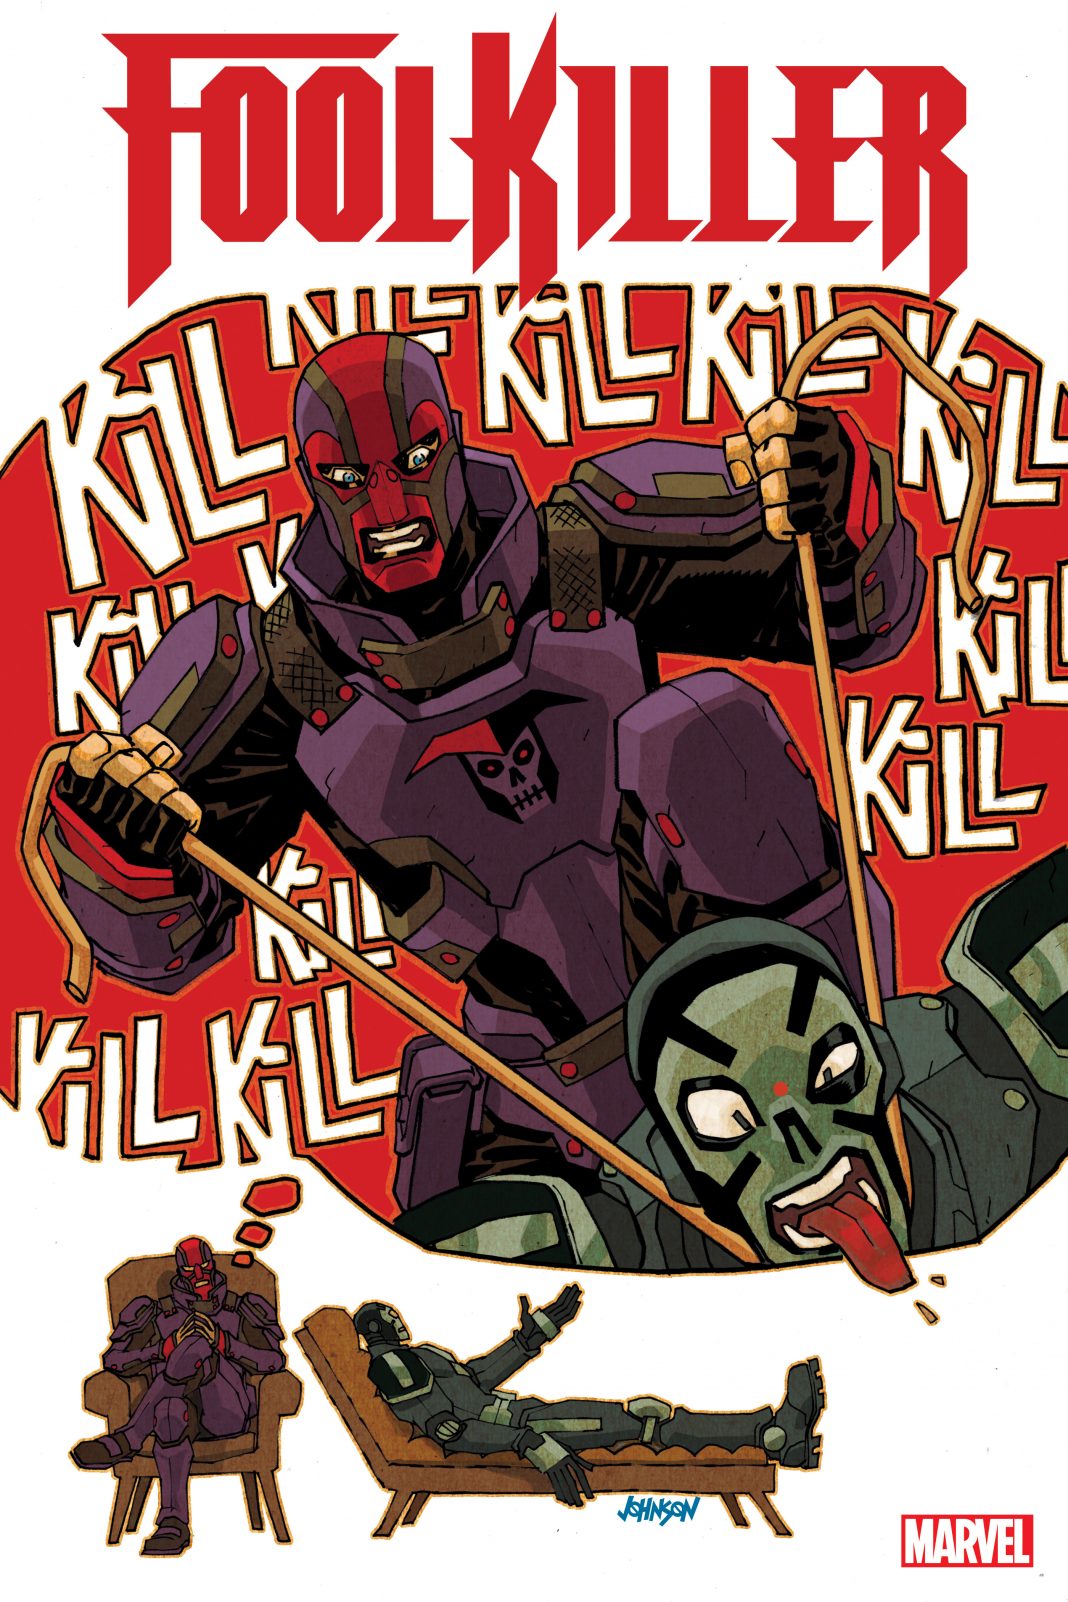 MARVEL COMICS’ FOOLKILLER #1 DIVES INTO THE PSYCHE OF MARVEL’S BADDEST